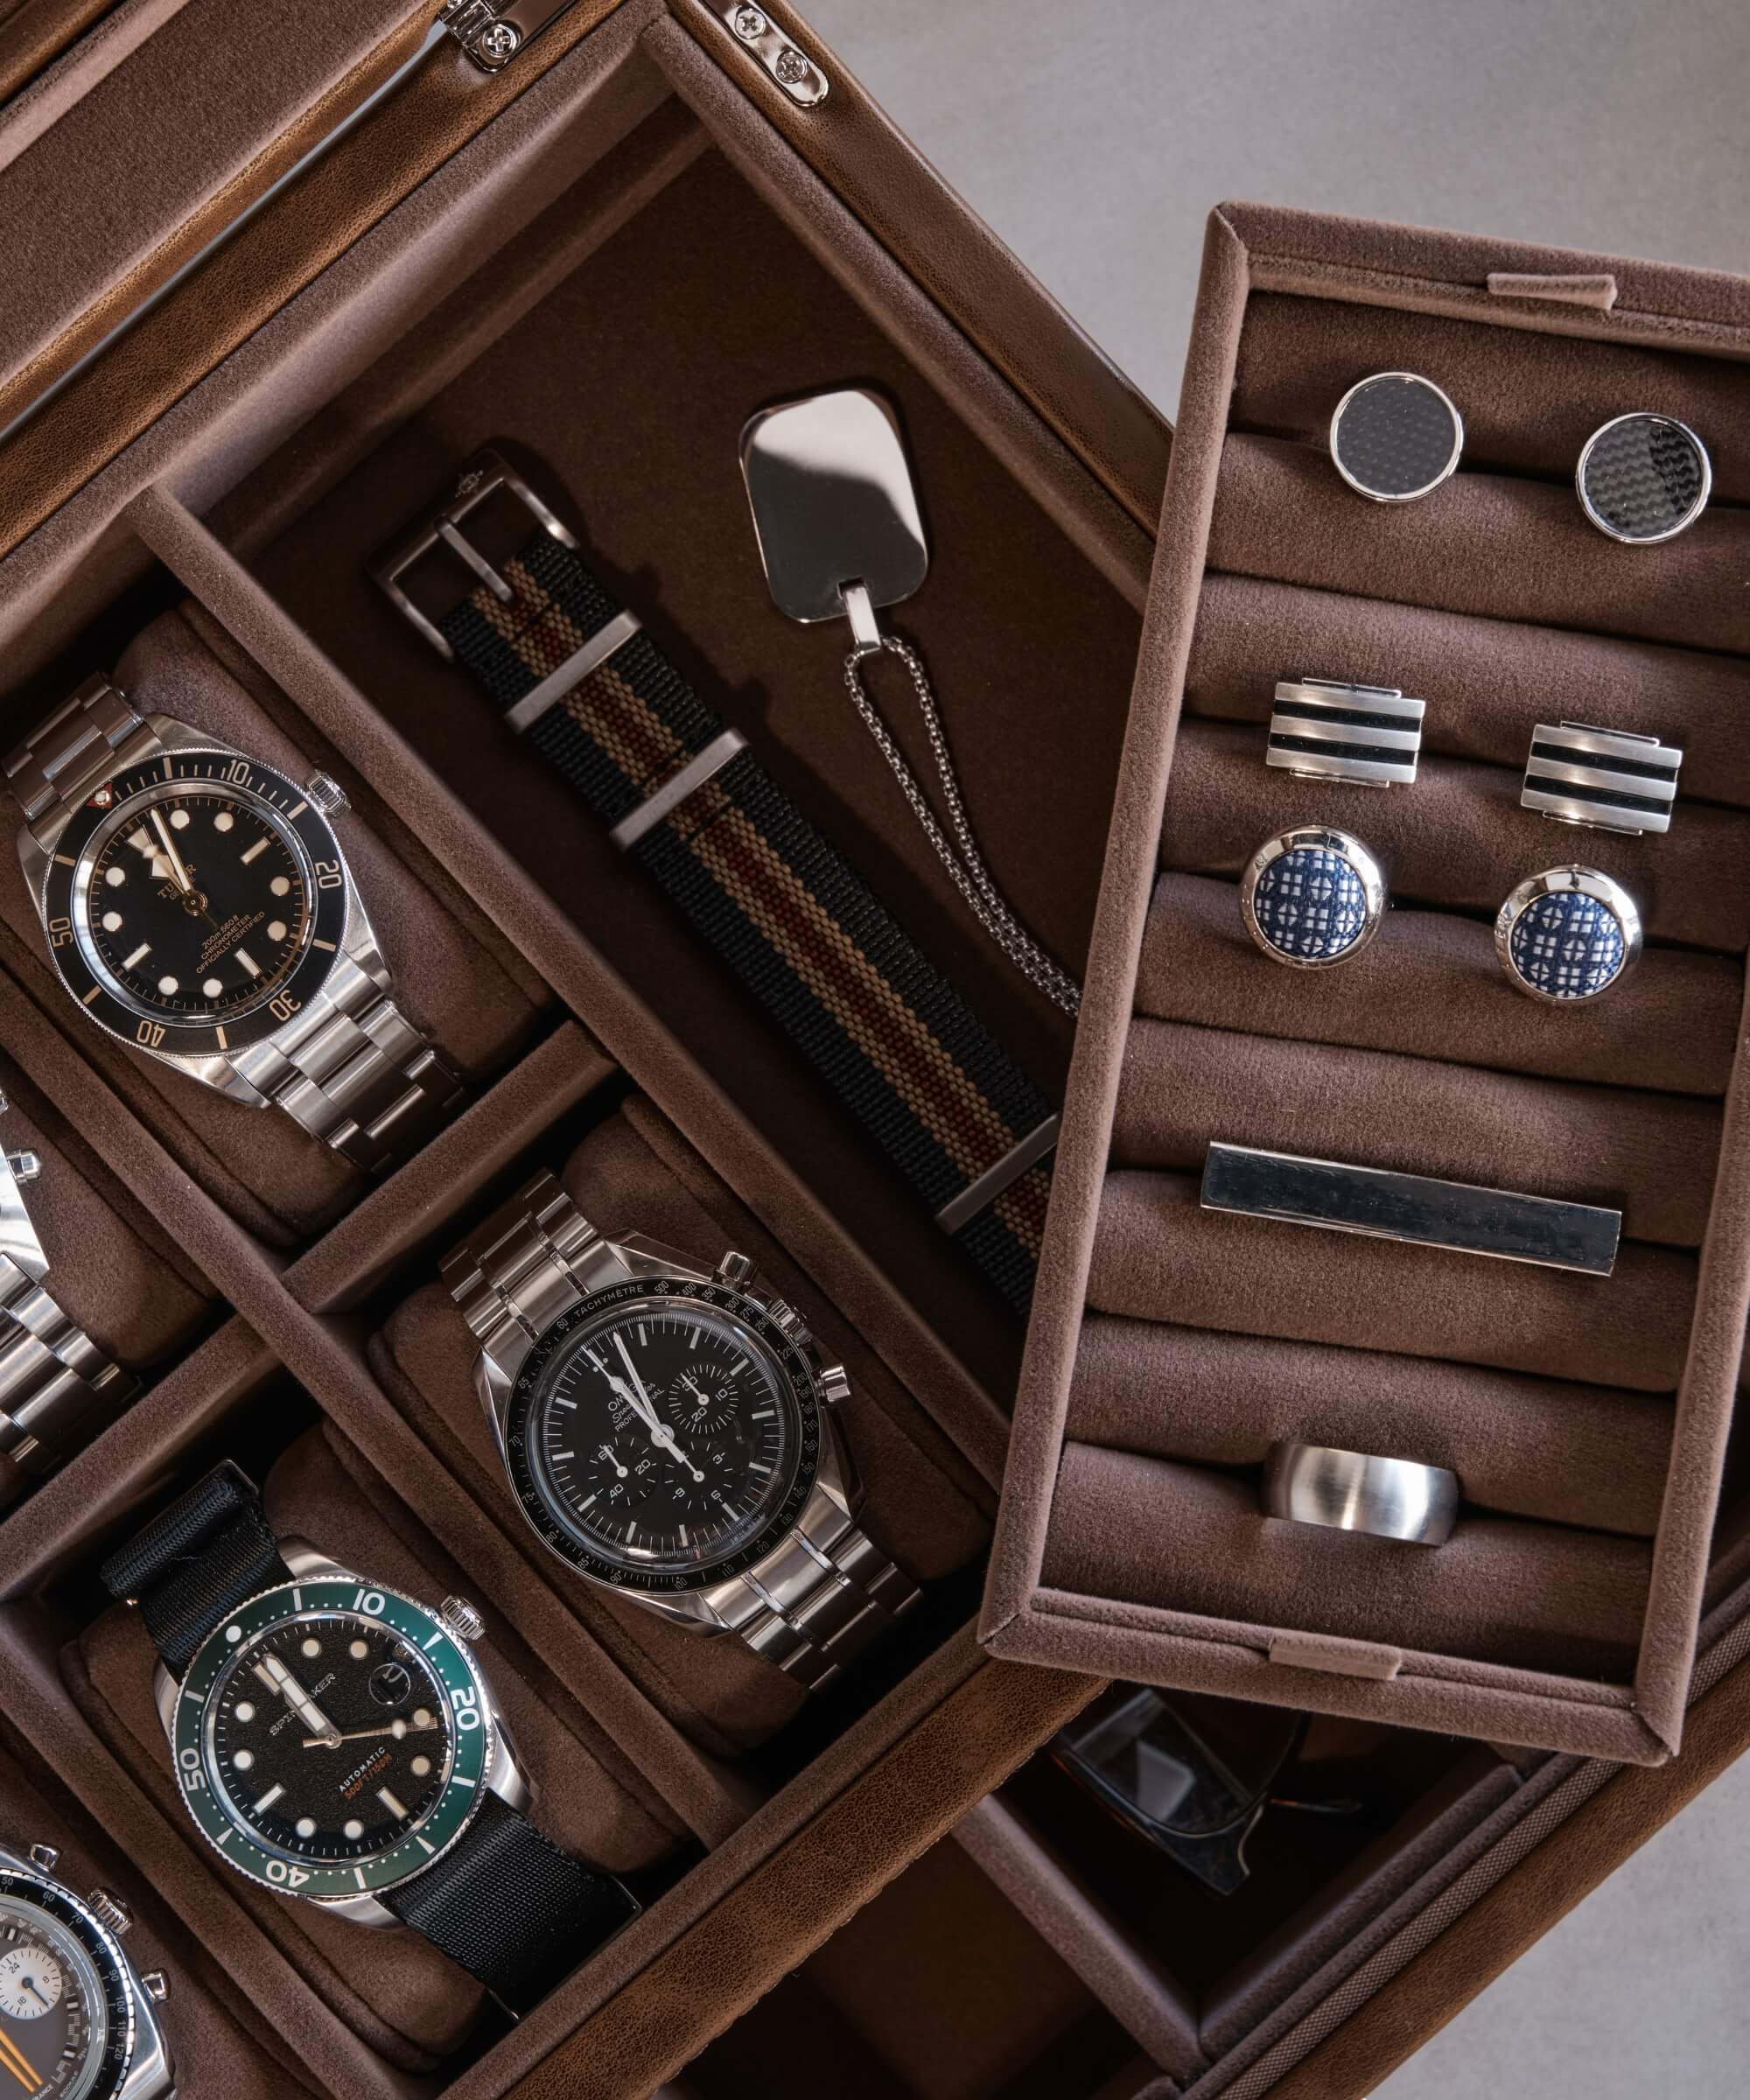 The TAWBURY Bayswater 6 Watch Jewellery Box - Brown is a stylish, vegan leather brown box that is perfect for watch enthusiasts. It is filled with an assortment of watches, cufflinks, and other accessories.